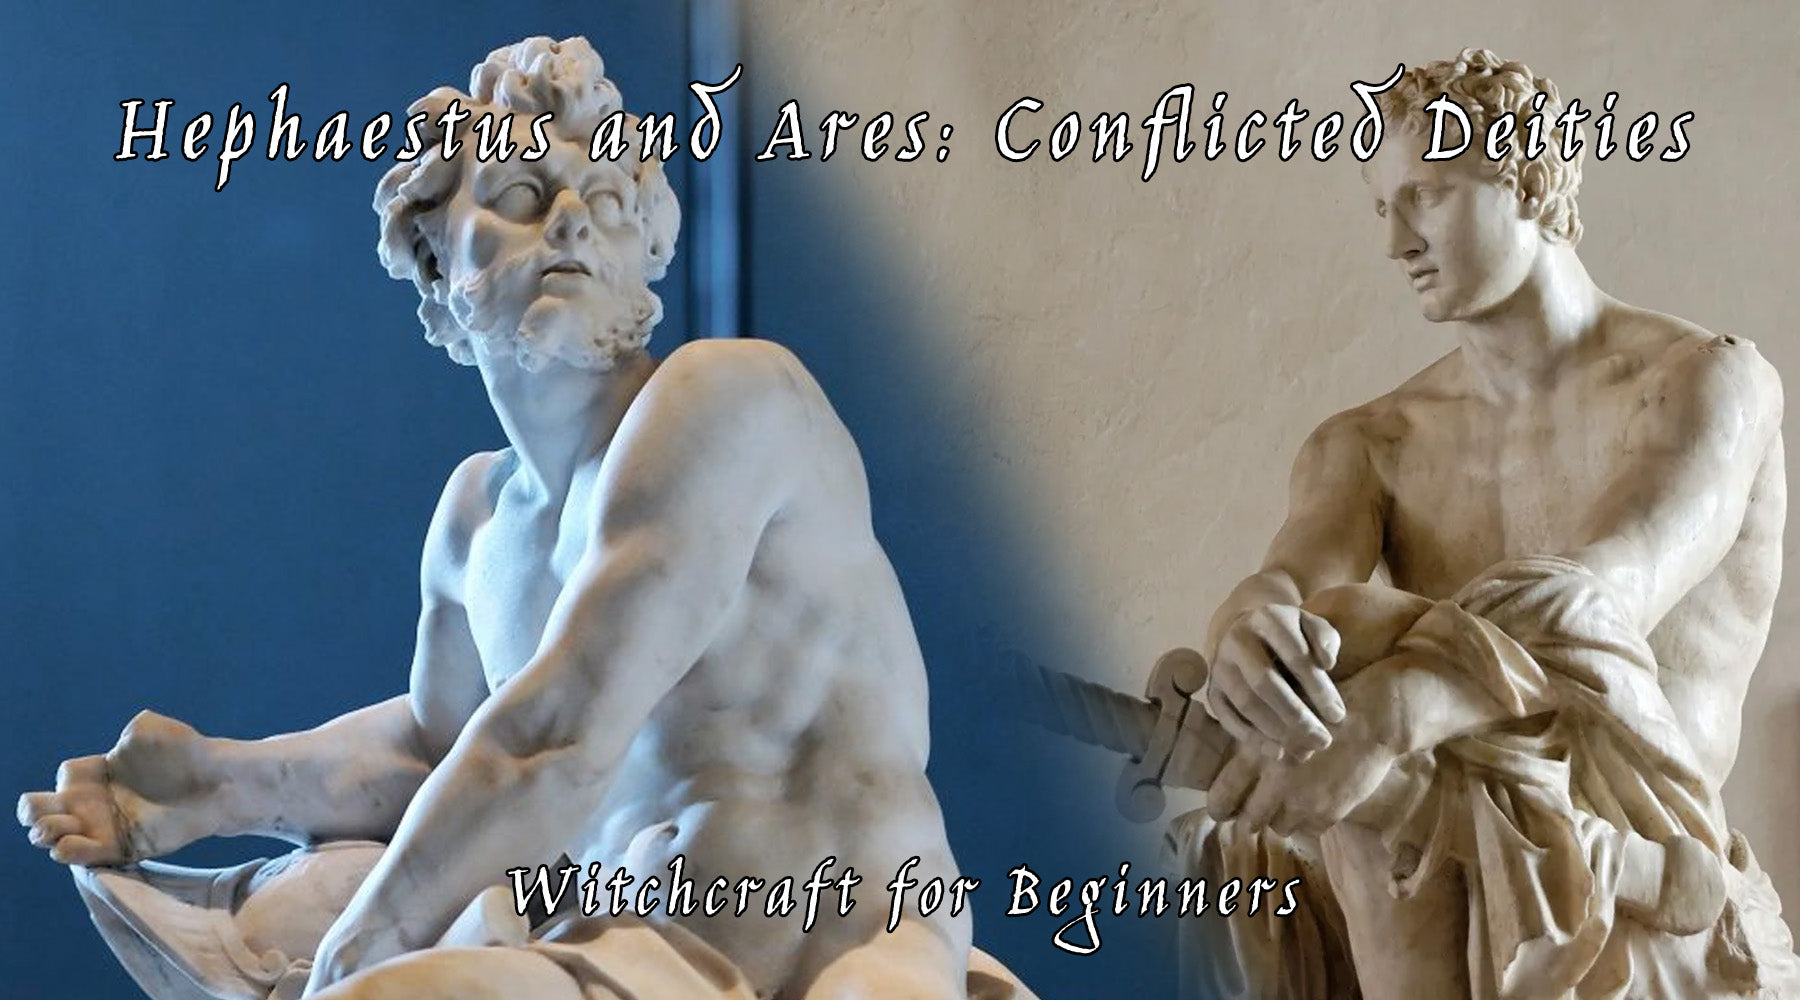 Why Do Hephaestus and Ares Hate Each Other?